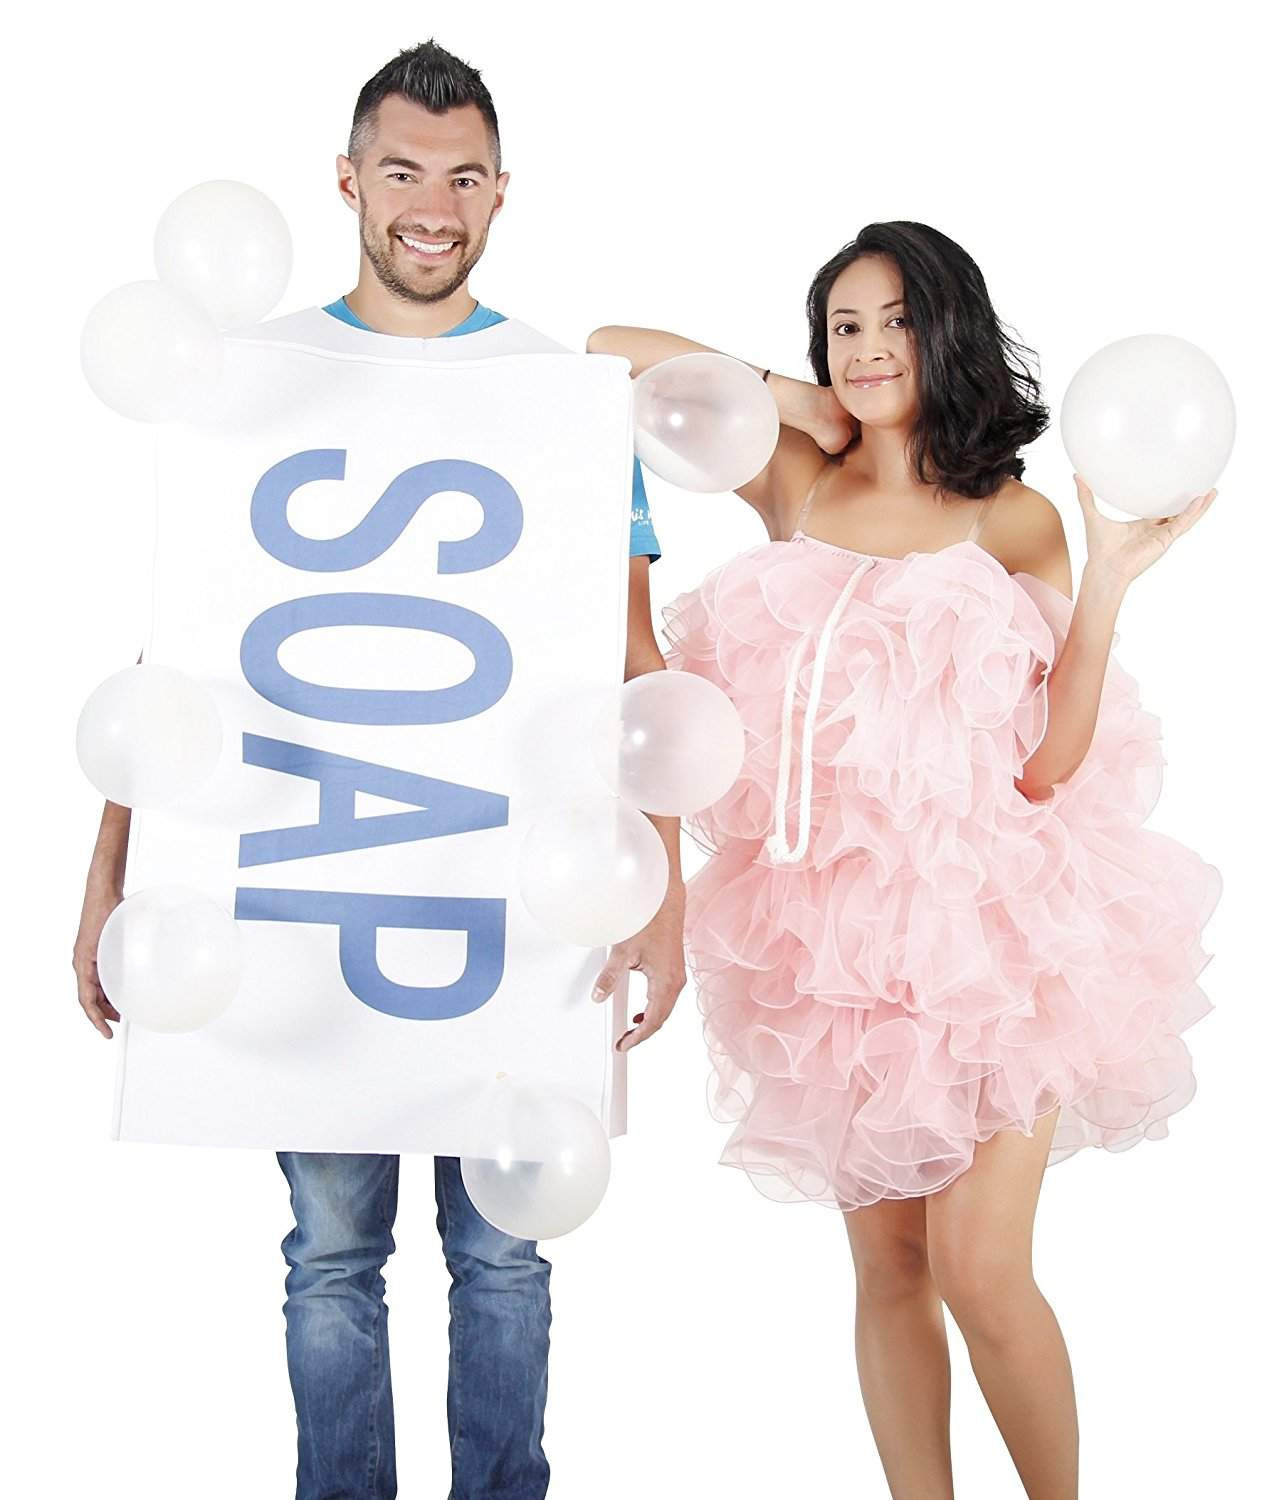 Halloween Costume Ideas Couples
 Top 10 Best Halloween Costumes for Couples